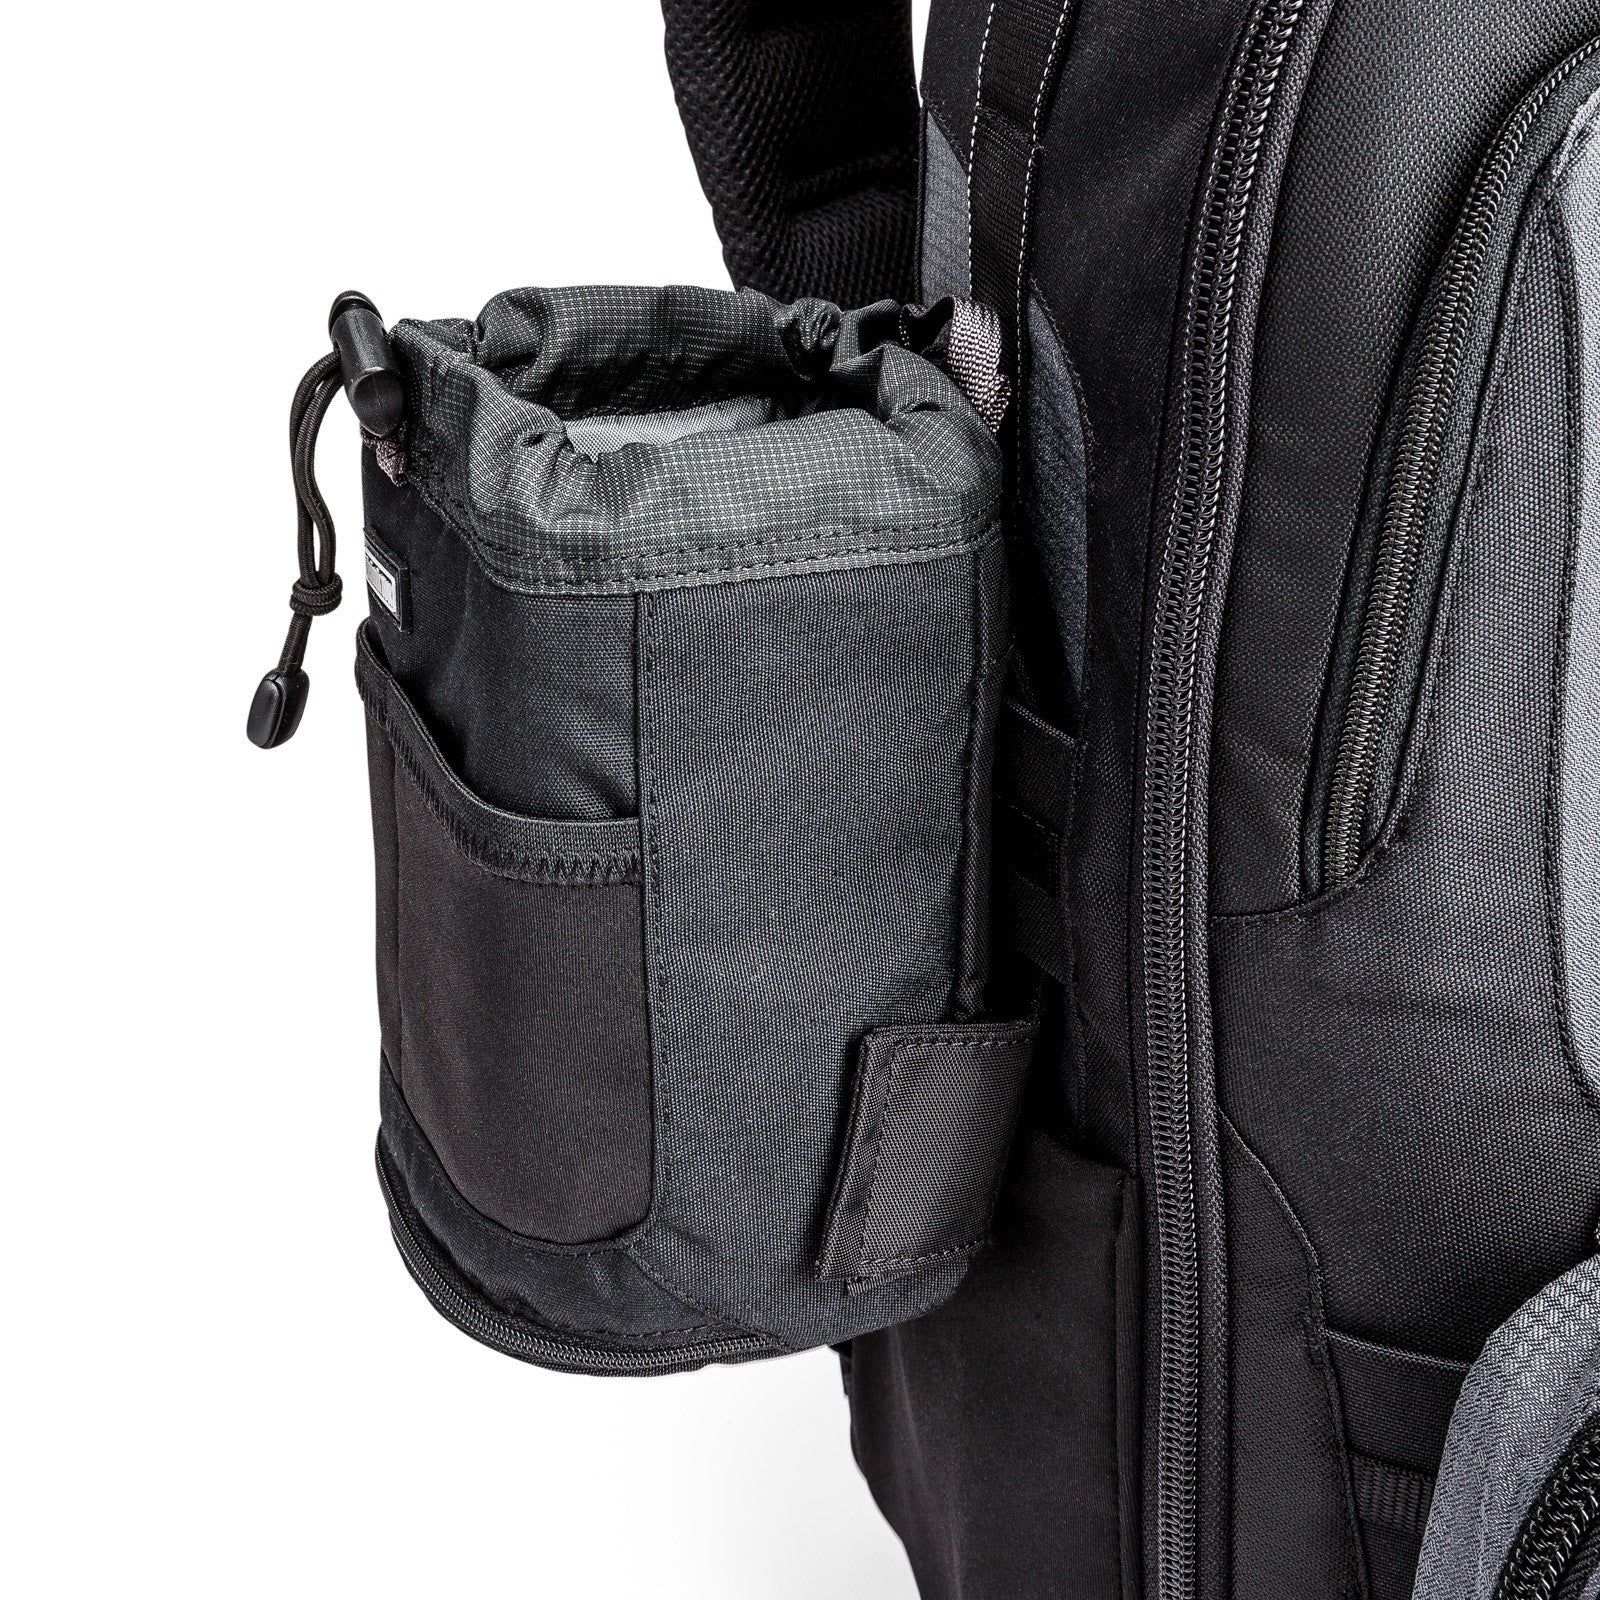 Expand the bag's capacity by adding up to three Modular Pouches for lenses, camera bodies, water bottles, and more!